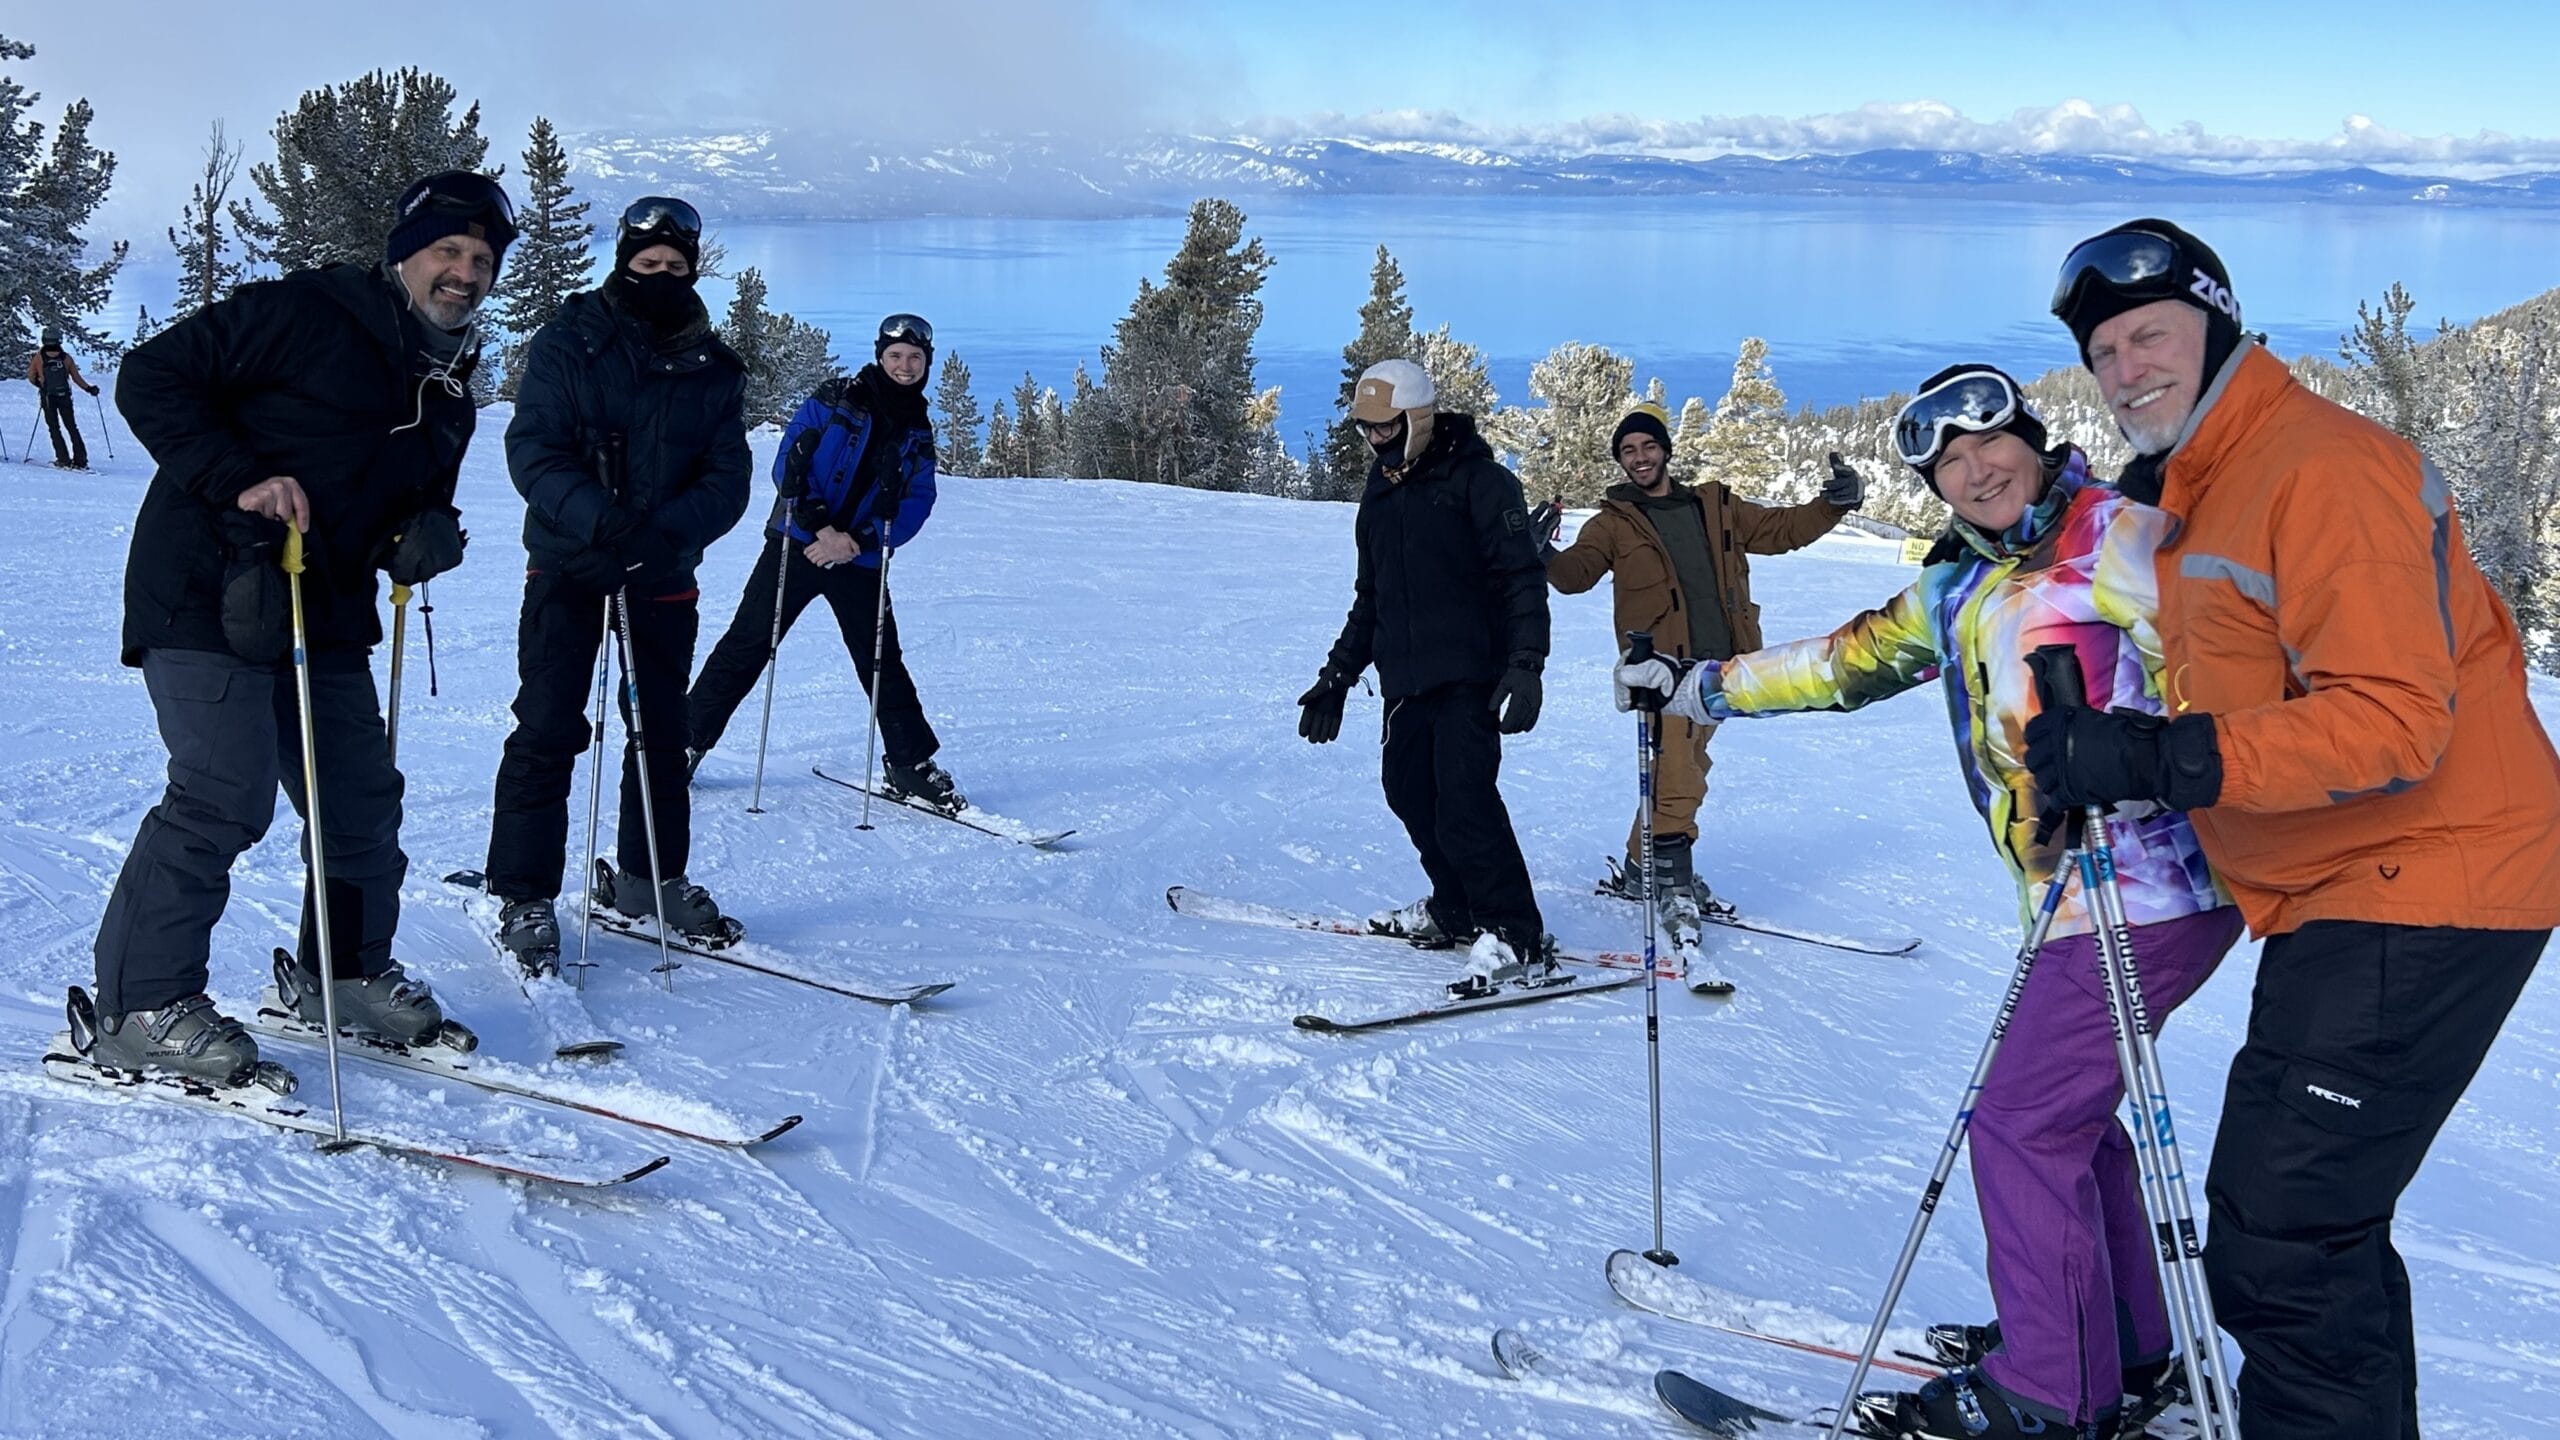 Seven people pose for a photo atop a mountain, all on skis.